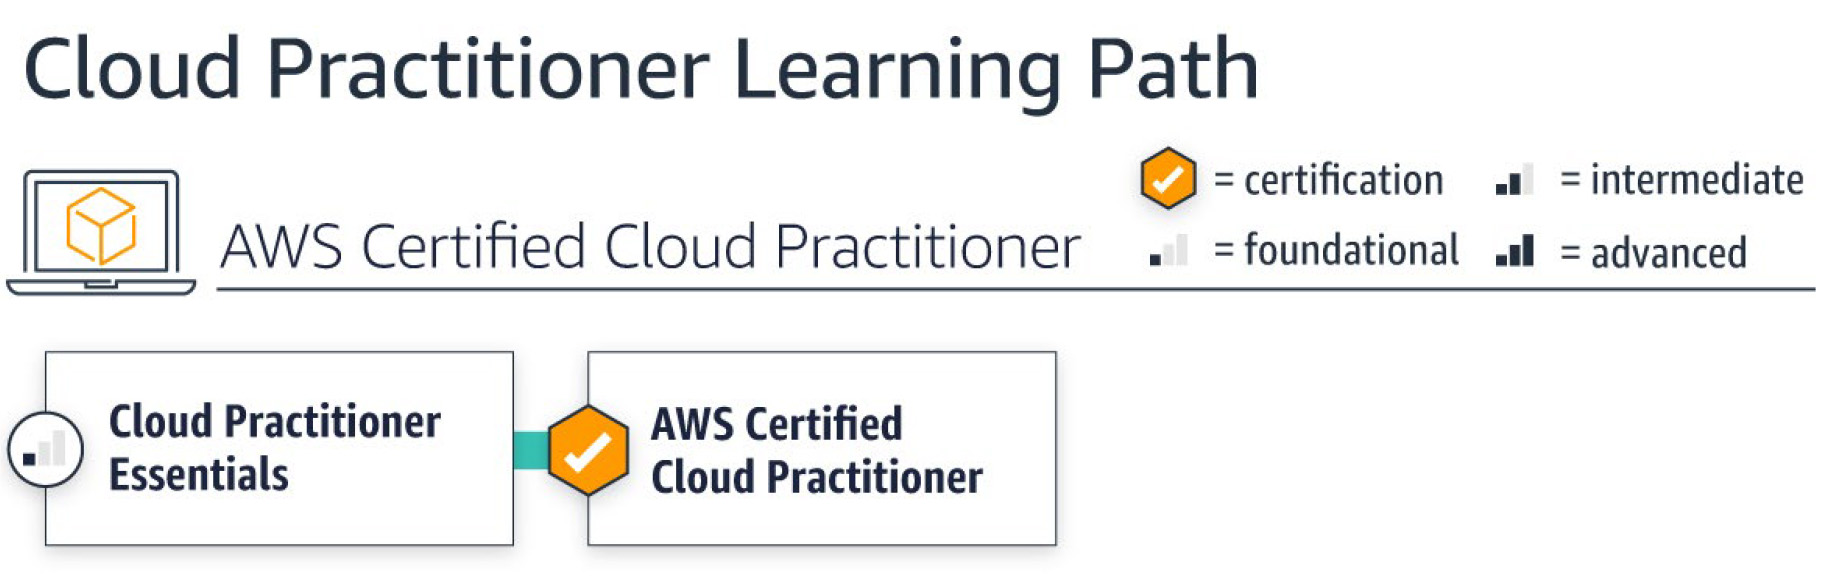 AWS Cloud Practitioner Learning Path